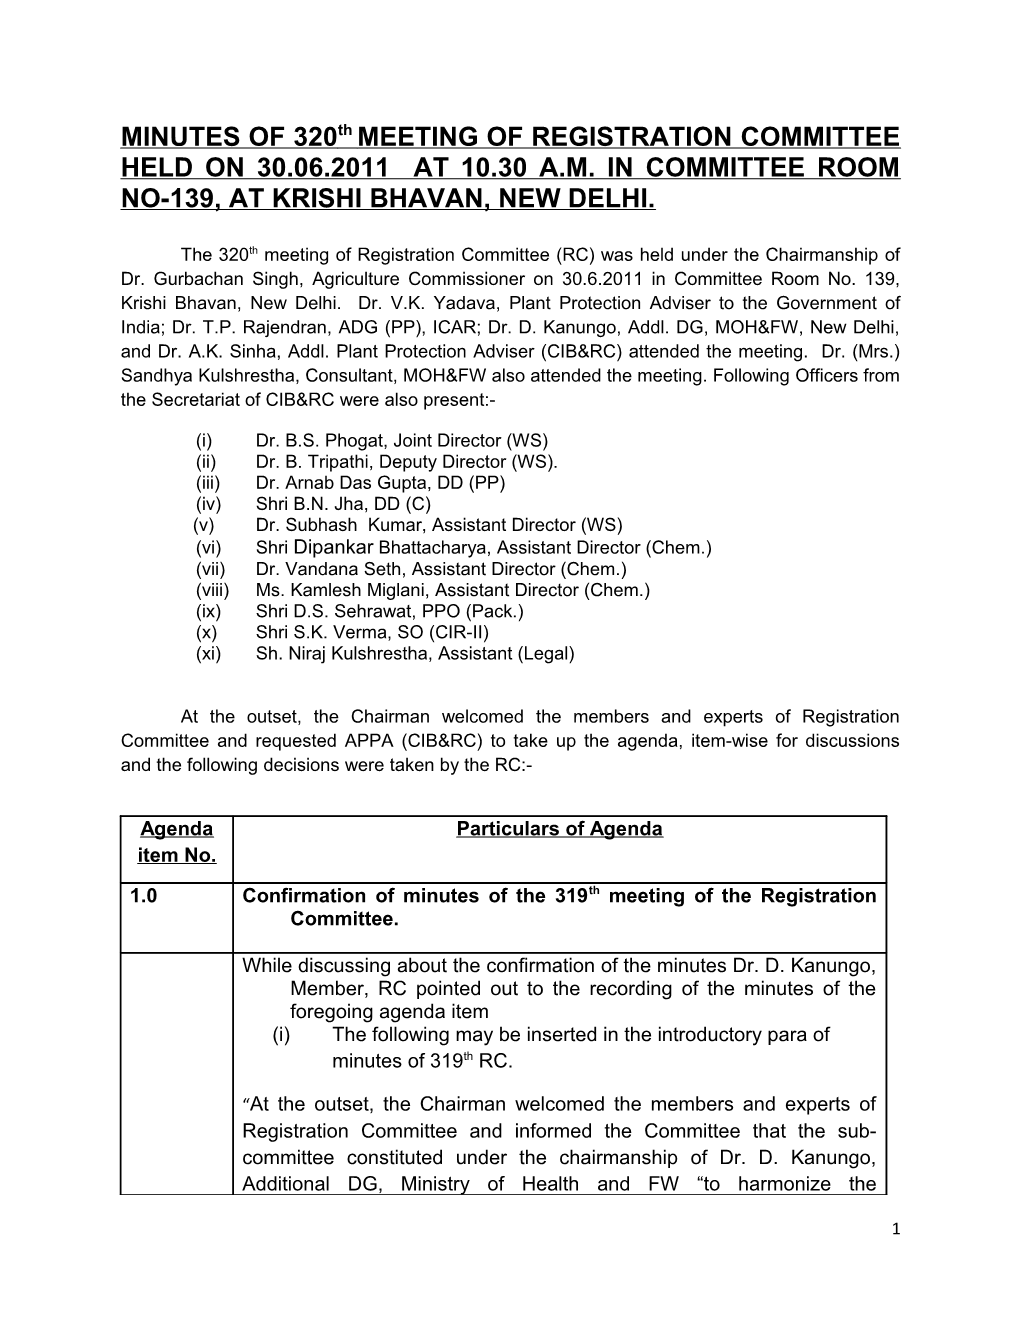 MINUTES of 320Th MEETING of REGISTRATION COMMITTEE HELD on 30.06.2011 at 10.30 A.M. IN